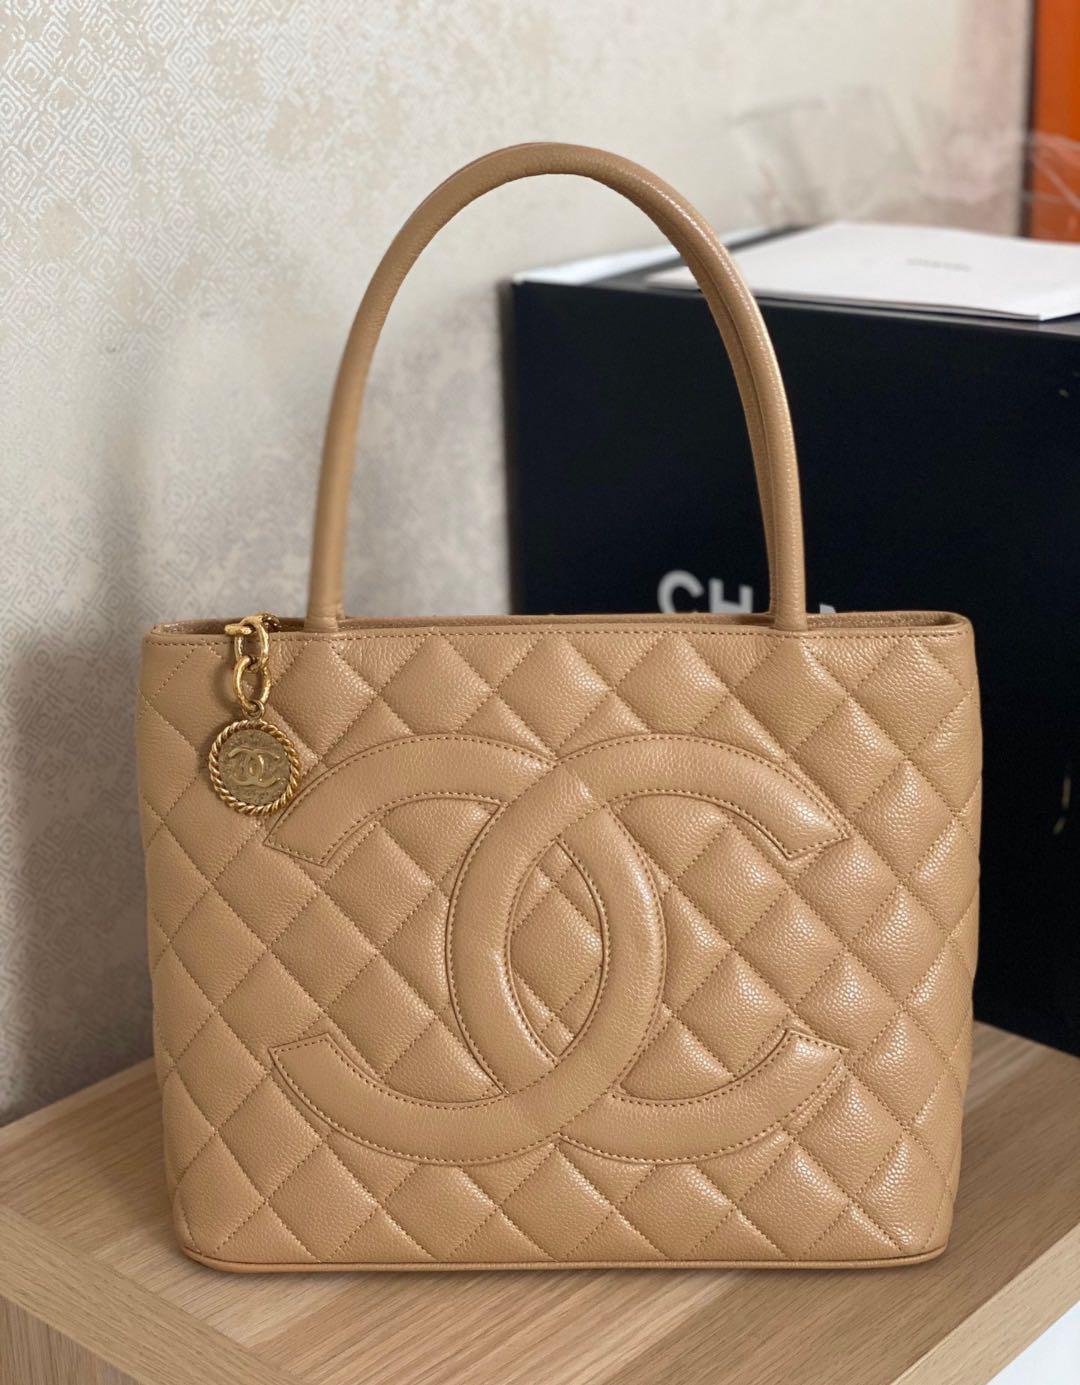 My New Chanel Medallion Tote 